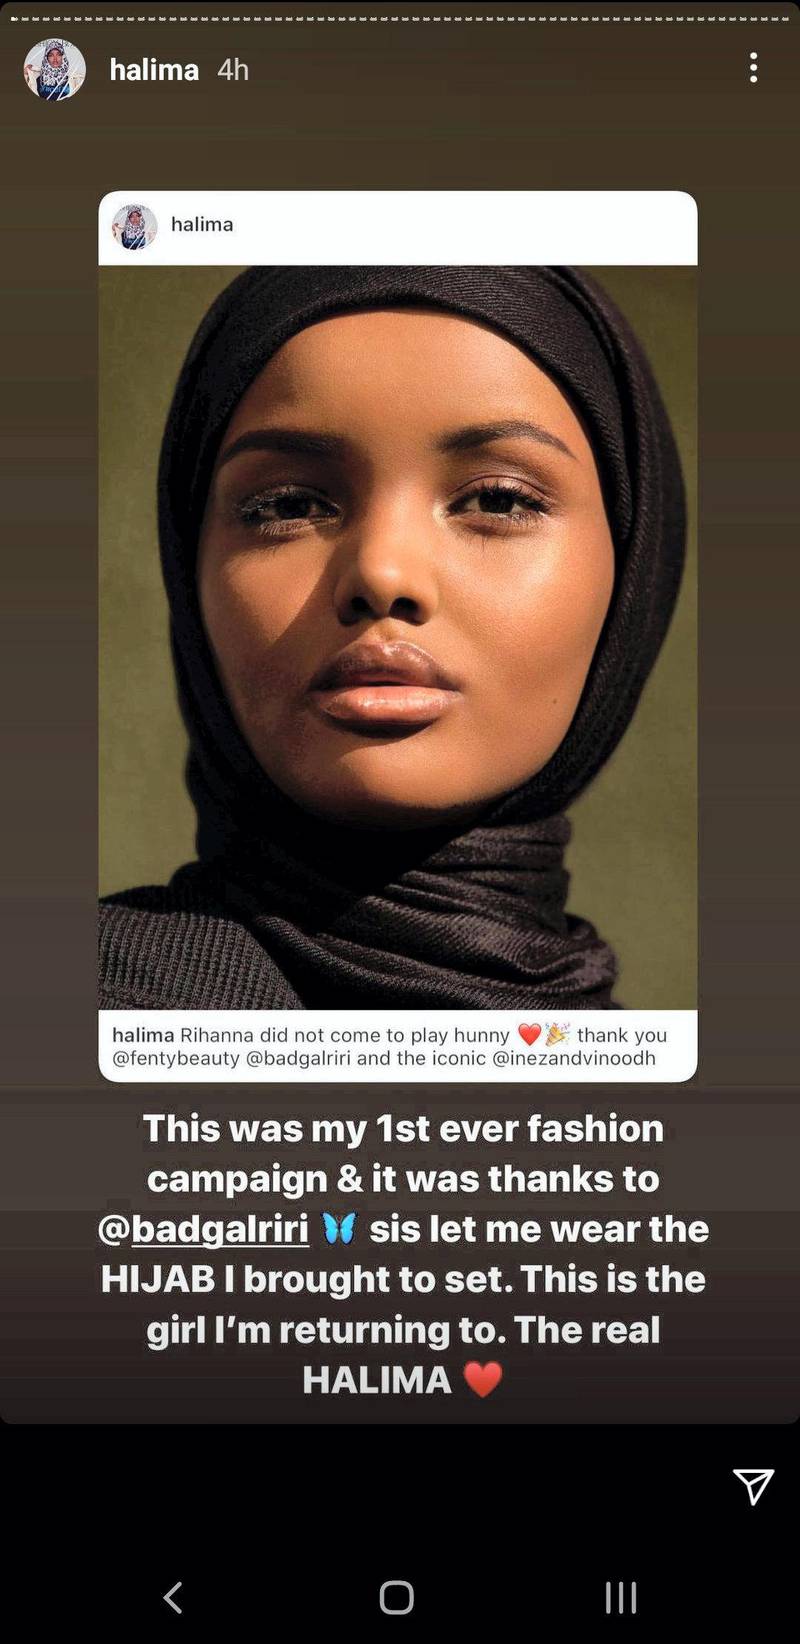 Halima Has a New Hijab Collection with Modanisa